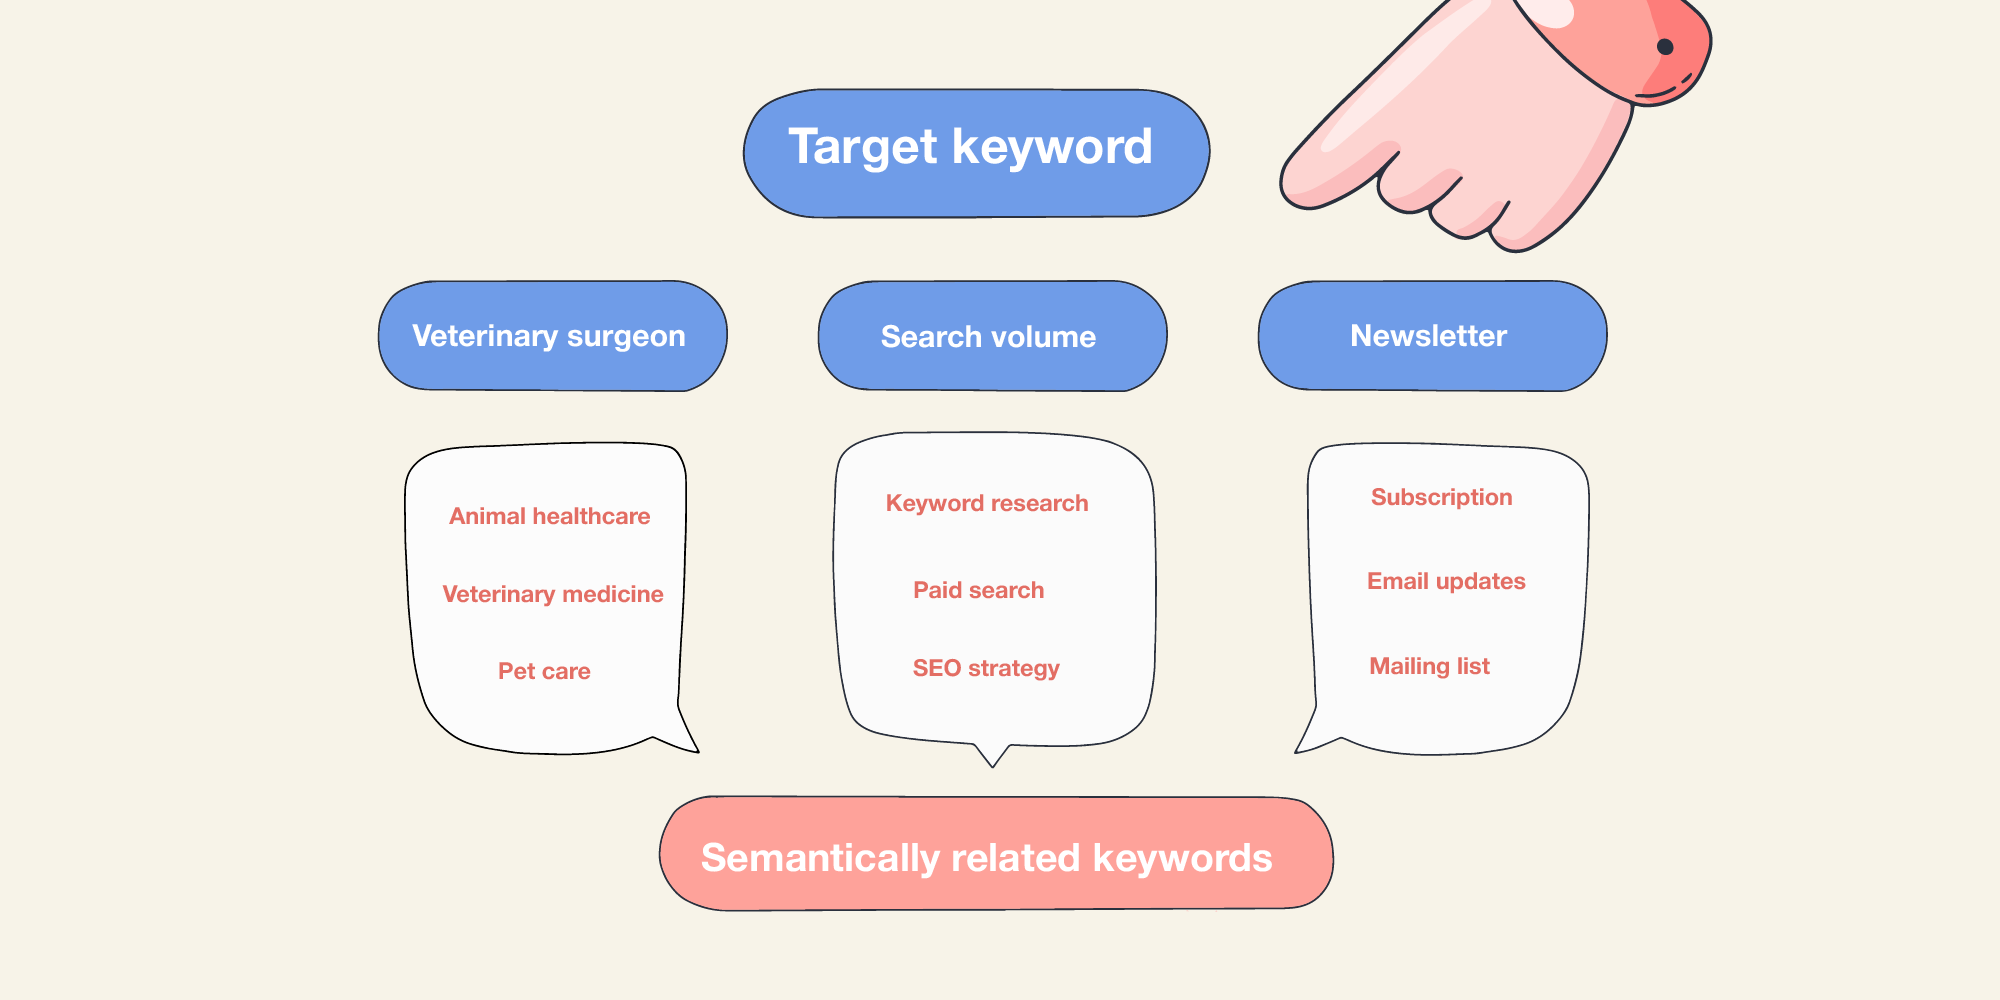 What are semantically related keywords